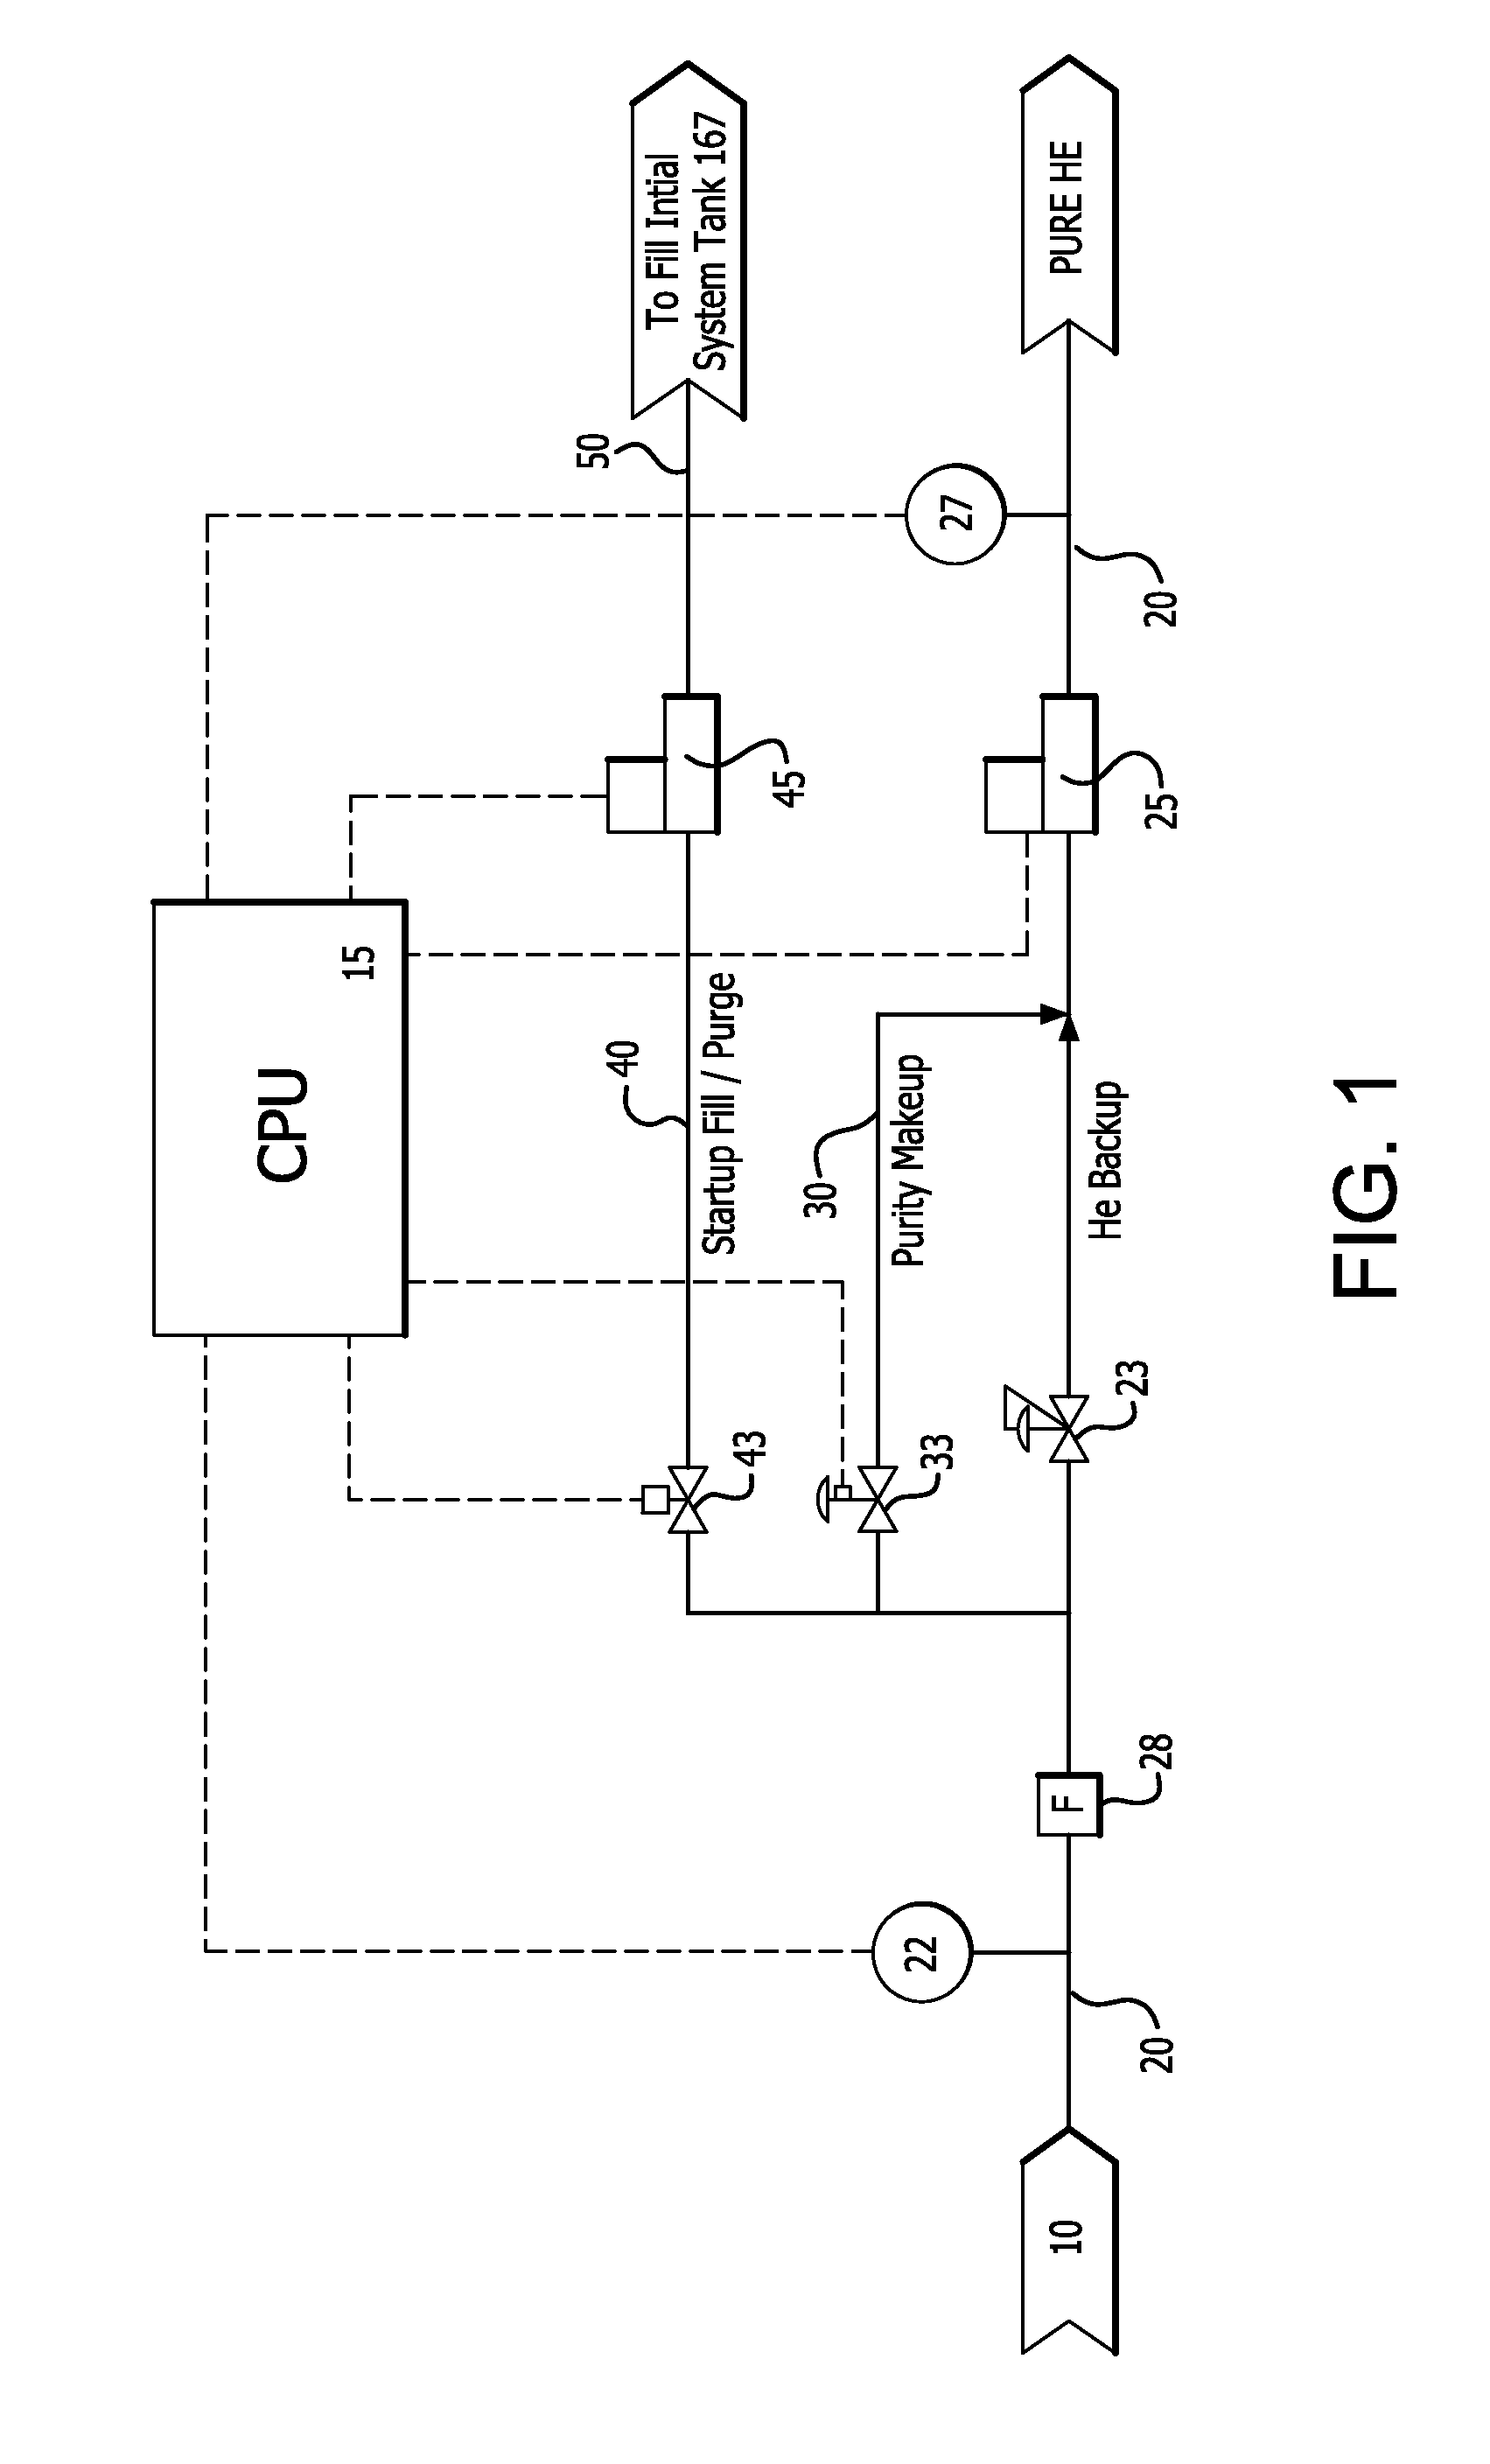 System and method for gas recovery and reuse